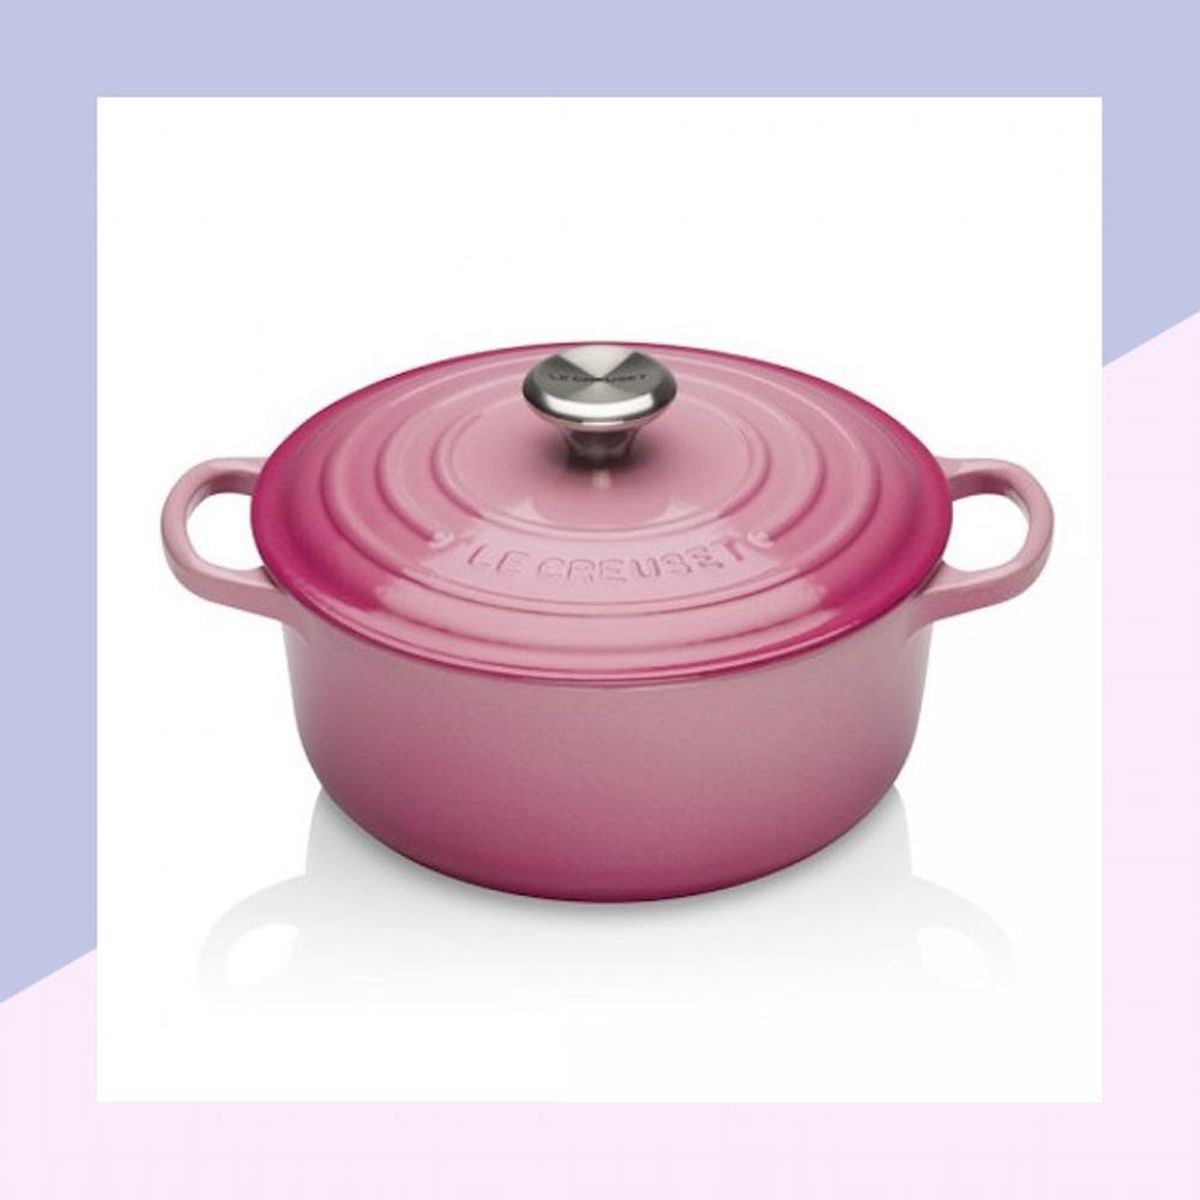 Le Creuset Now Has Ombre Cookware and We Want It All